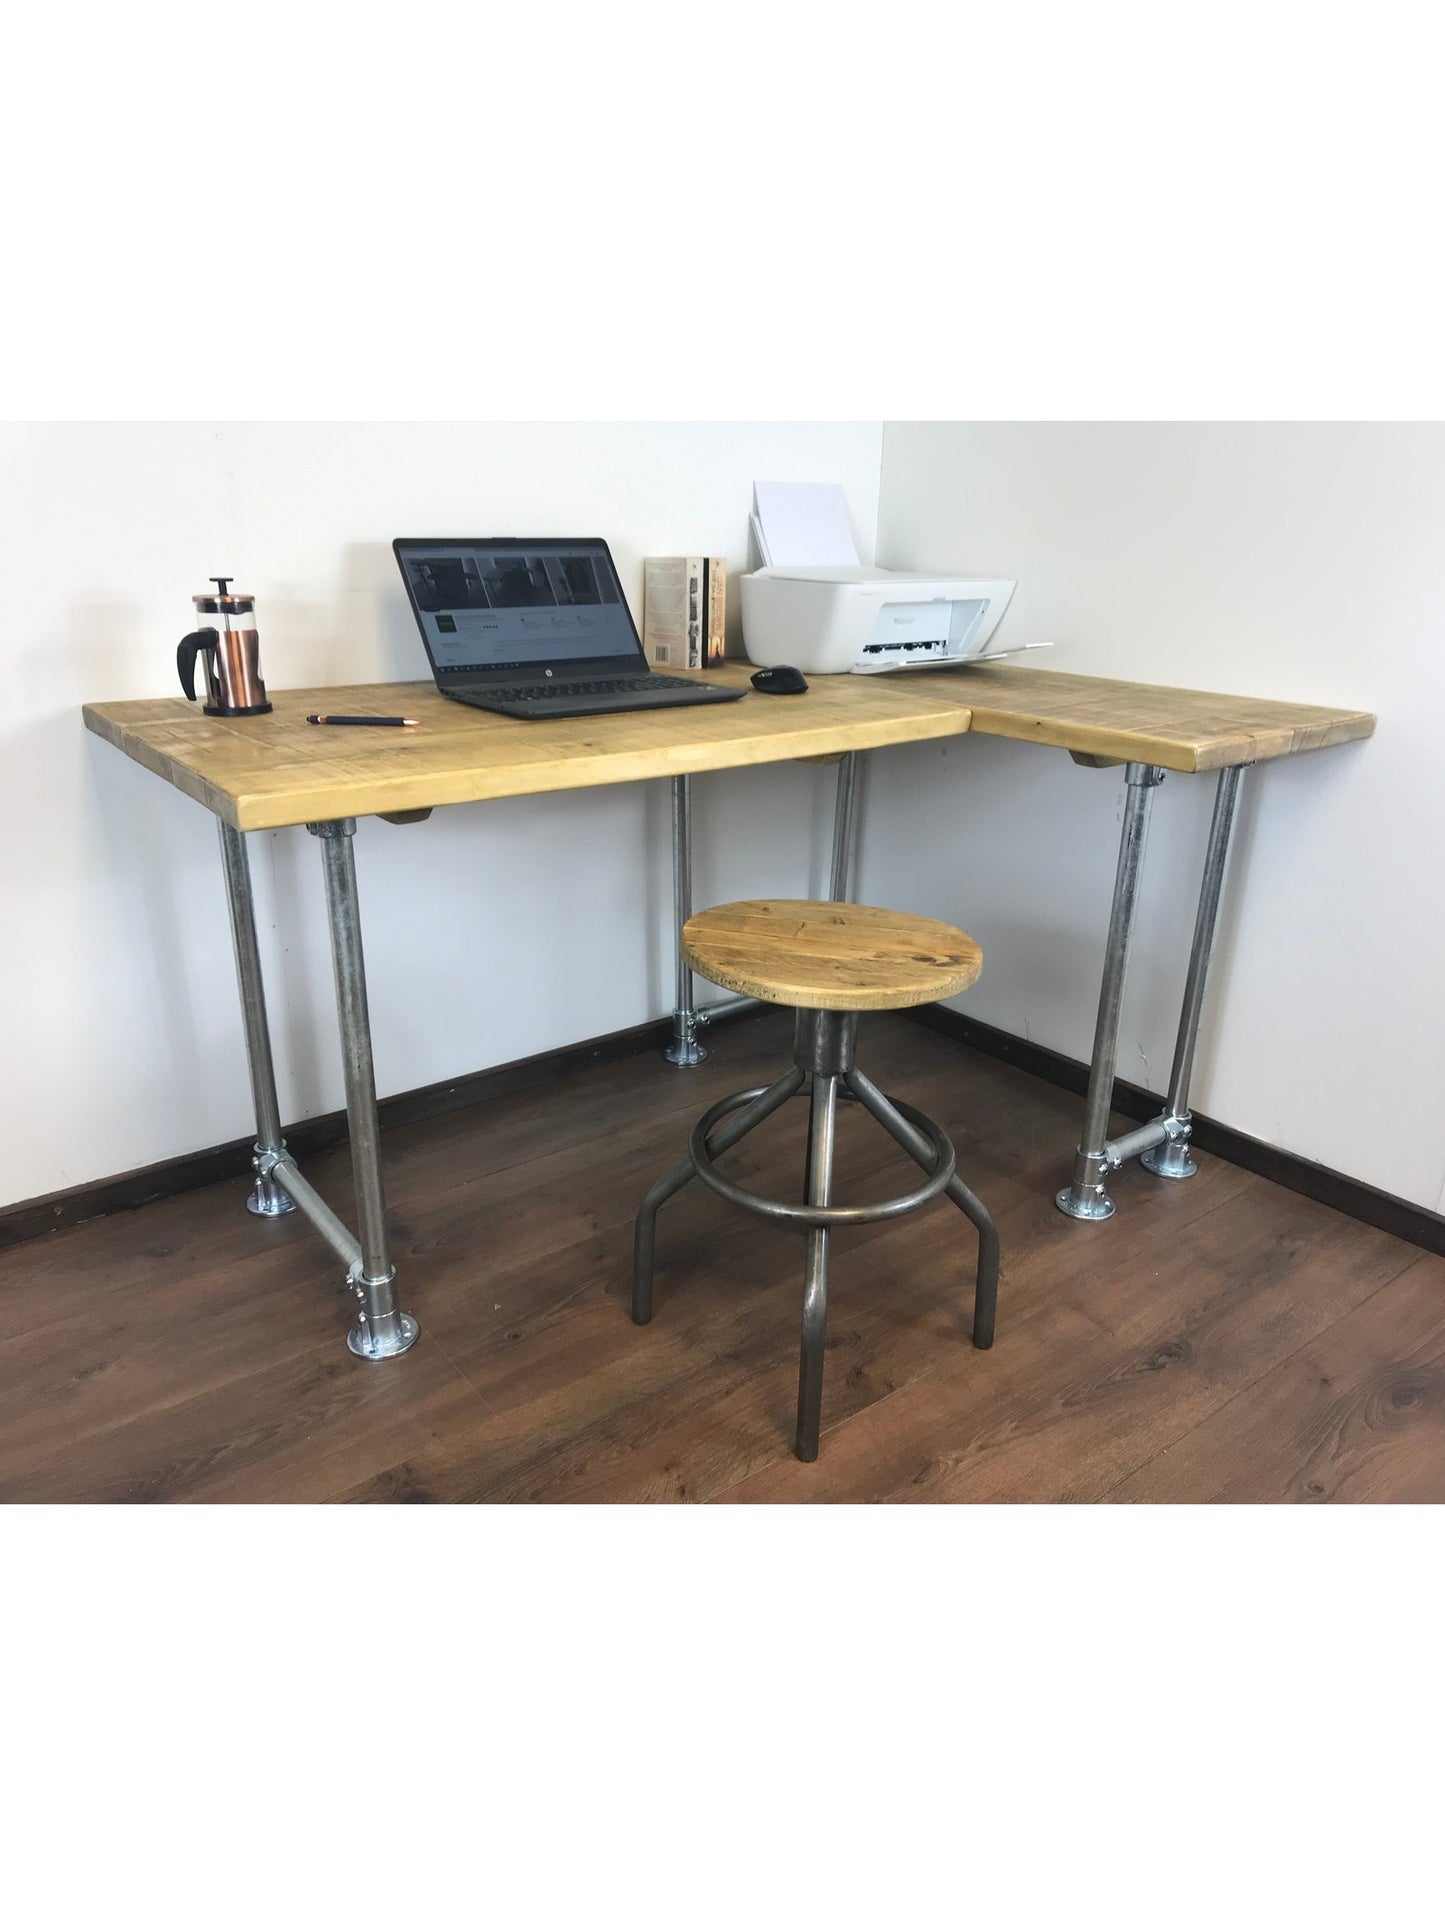 Rustic Industrial Corner Desk - L-Shape with Silver Metal Legs - 3 Colours - Right or left-handed, Free UK delivery